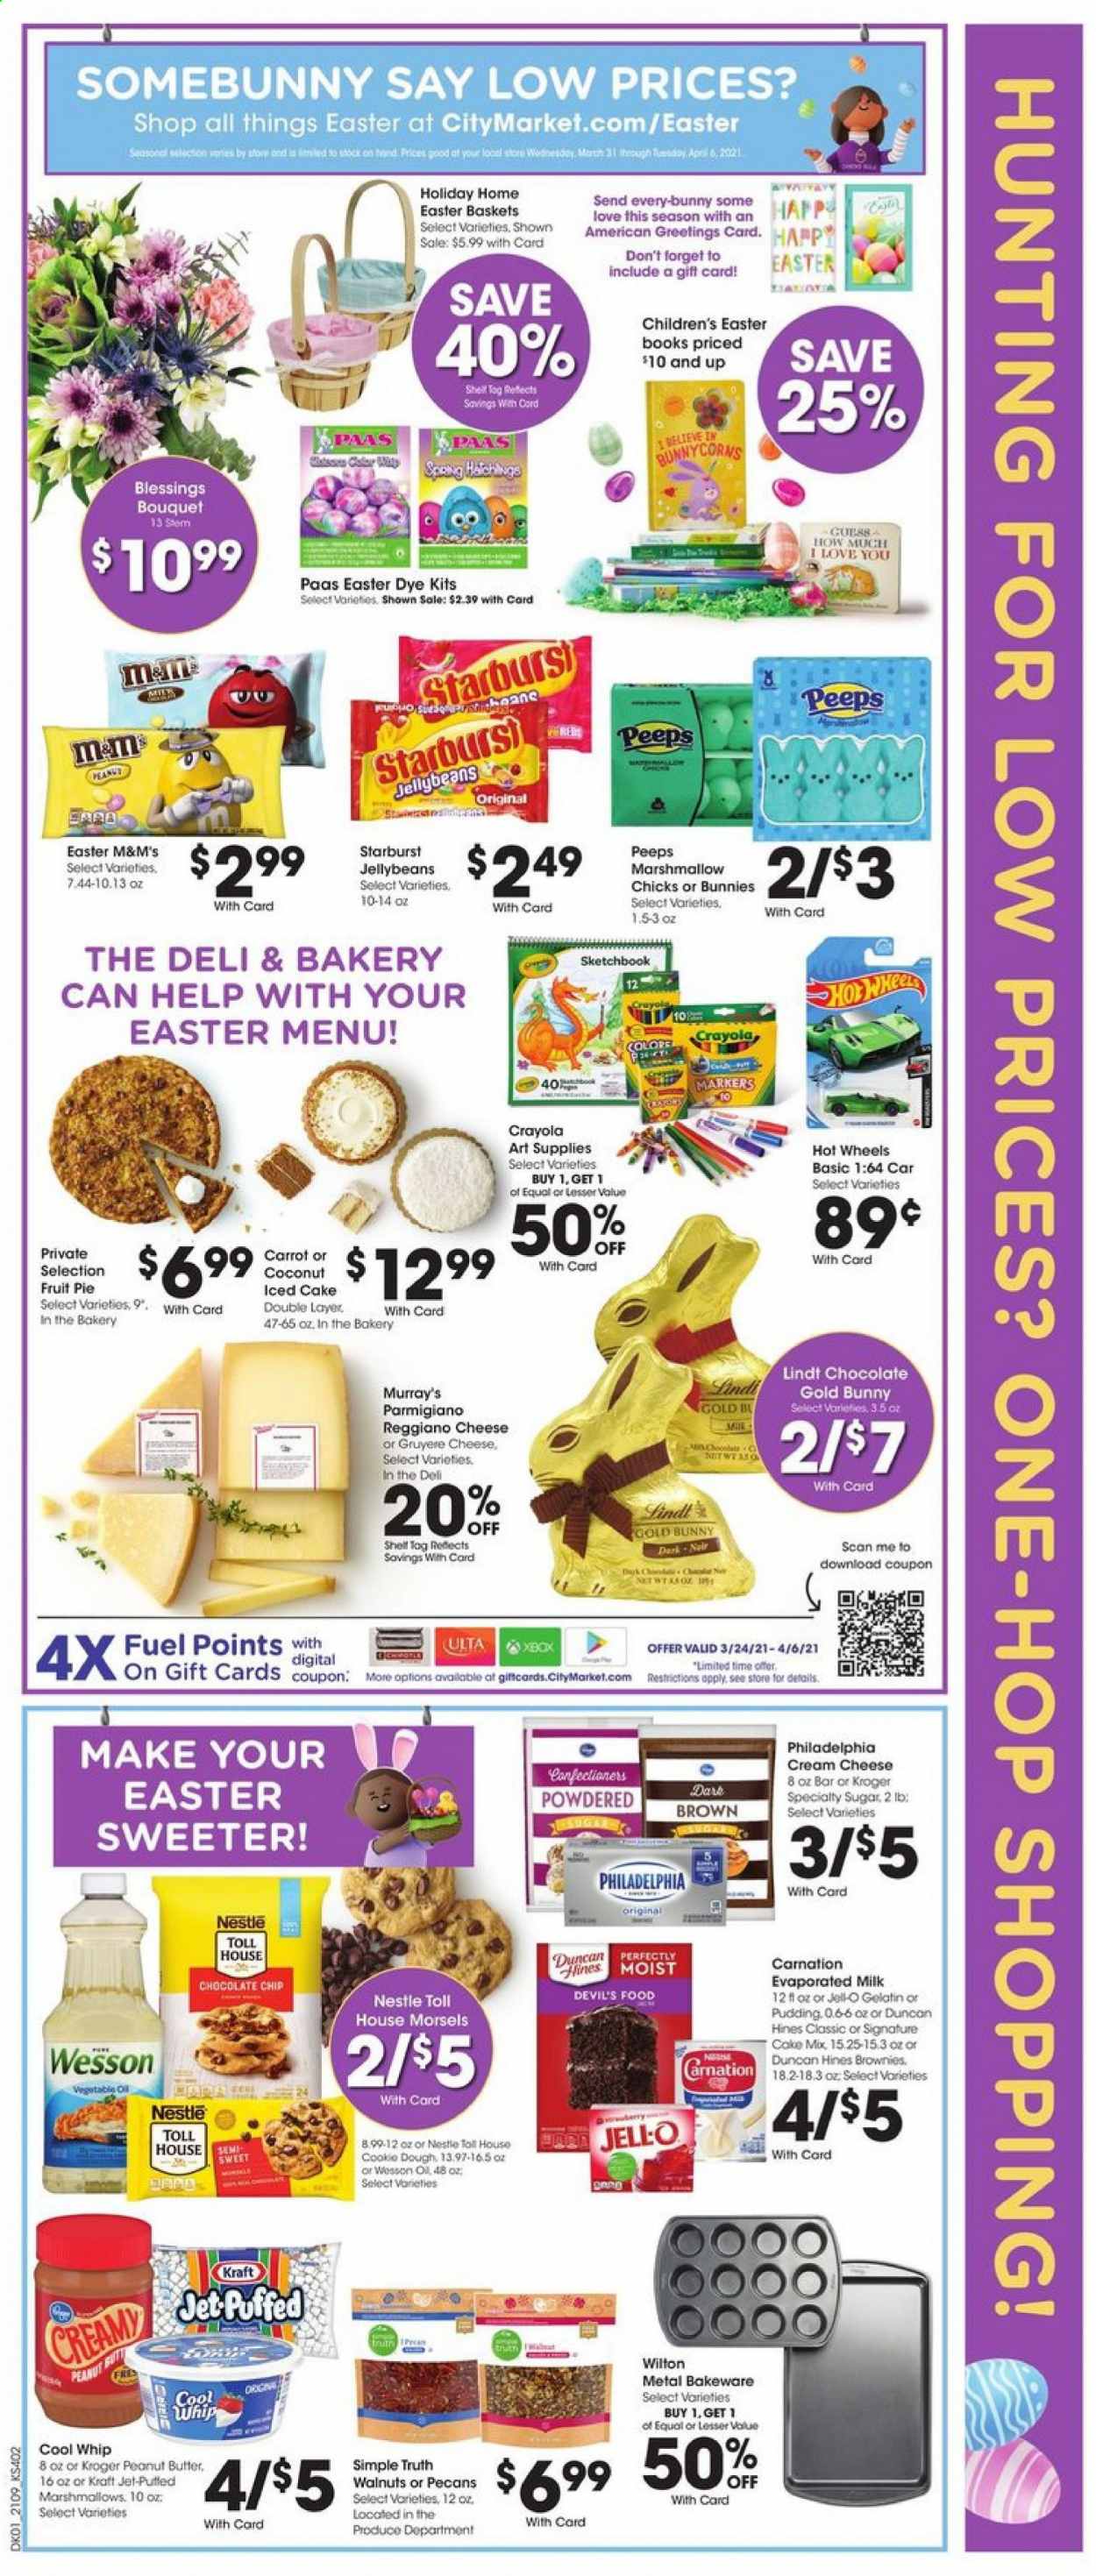 thumbnail - City Market Flyer - 03/31/2021 - 04/06/2021 - Sales products - cake mix, pie, brownies, coconut, cream cheese, Kraft®, Gruyere, Philadelphia, Parmigiano Reggiano, pudding, evaporated milk, Cool Whip, cookie dough, marshmallows, Nestlé, Lindt, M&M's, Starburst, Peeps, sugar, Jell-O, peanut butter, walnuts, pecans, Jet, Guess, basket, bakeware, crayons, sketch pad, Hot Wheels, bouquet, gelatin. Page 2.